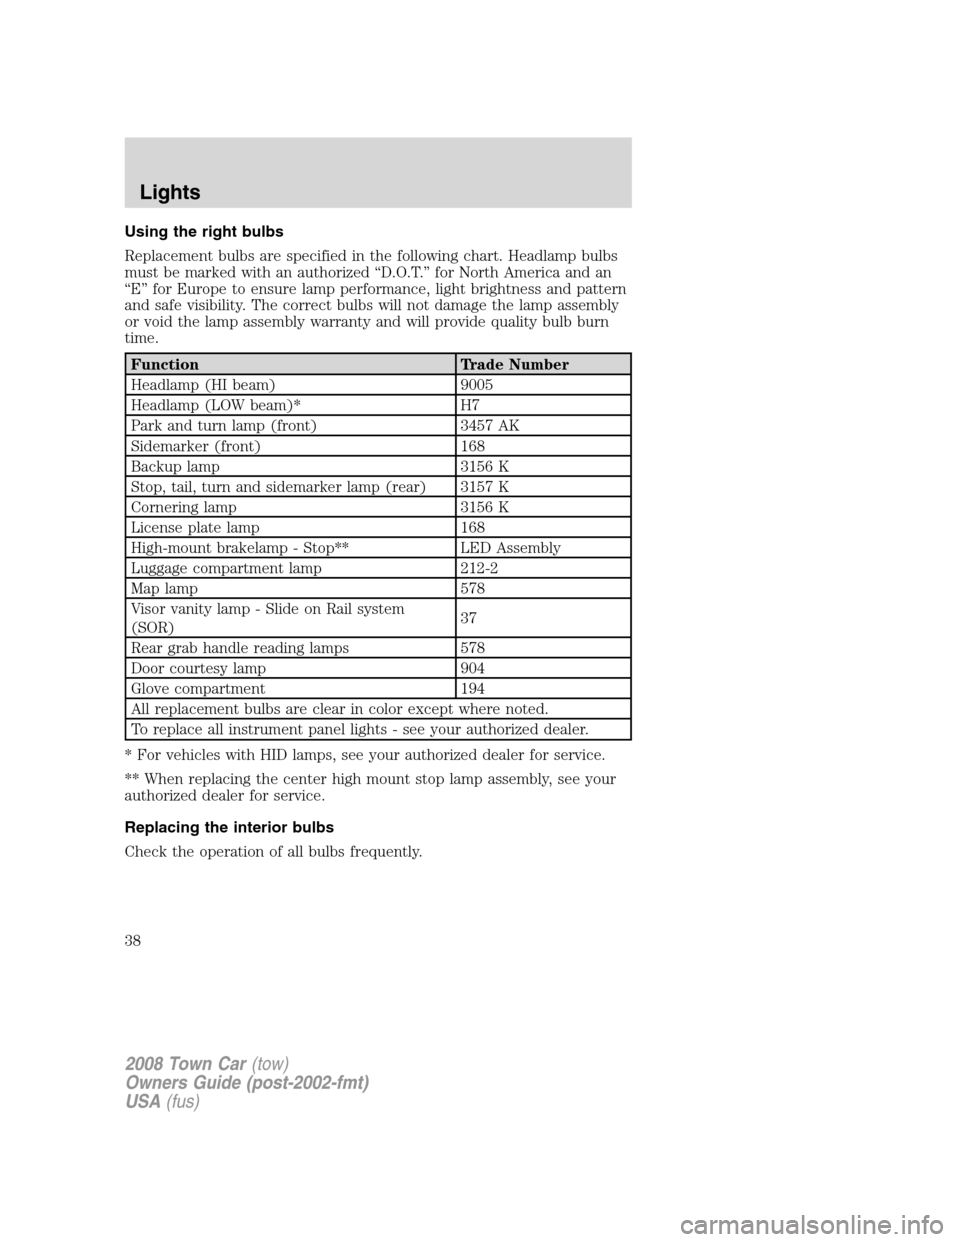 LINCOLN TOWN CAR 2008 Owners Guide Using the right bulbs
Replacement bulbs are specified in the following chart. Headlamp bulbs
must be marked with an authorized “D.O.T.” for North America and an
“E” for Europe to ensure lamp p